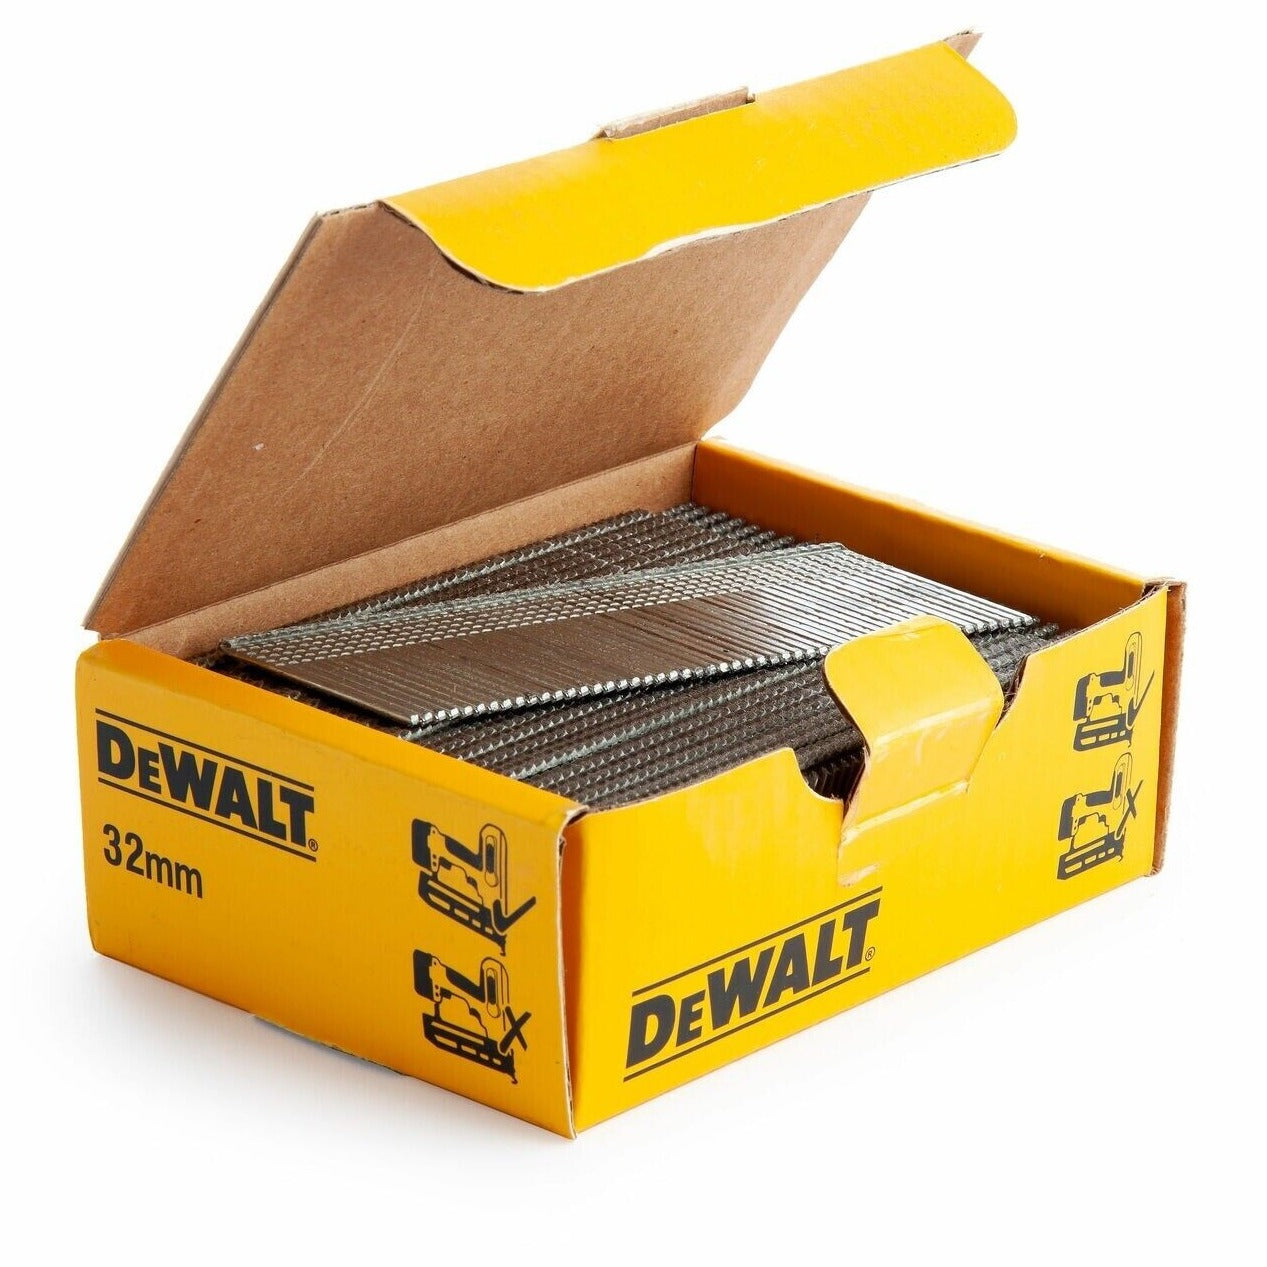 16G Collated 20° Angle Brad Nails 2500Pce by Dewalt